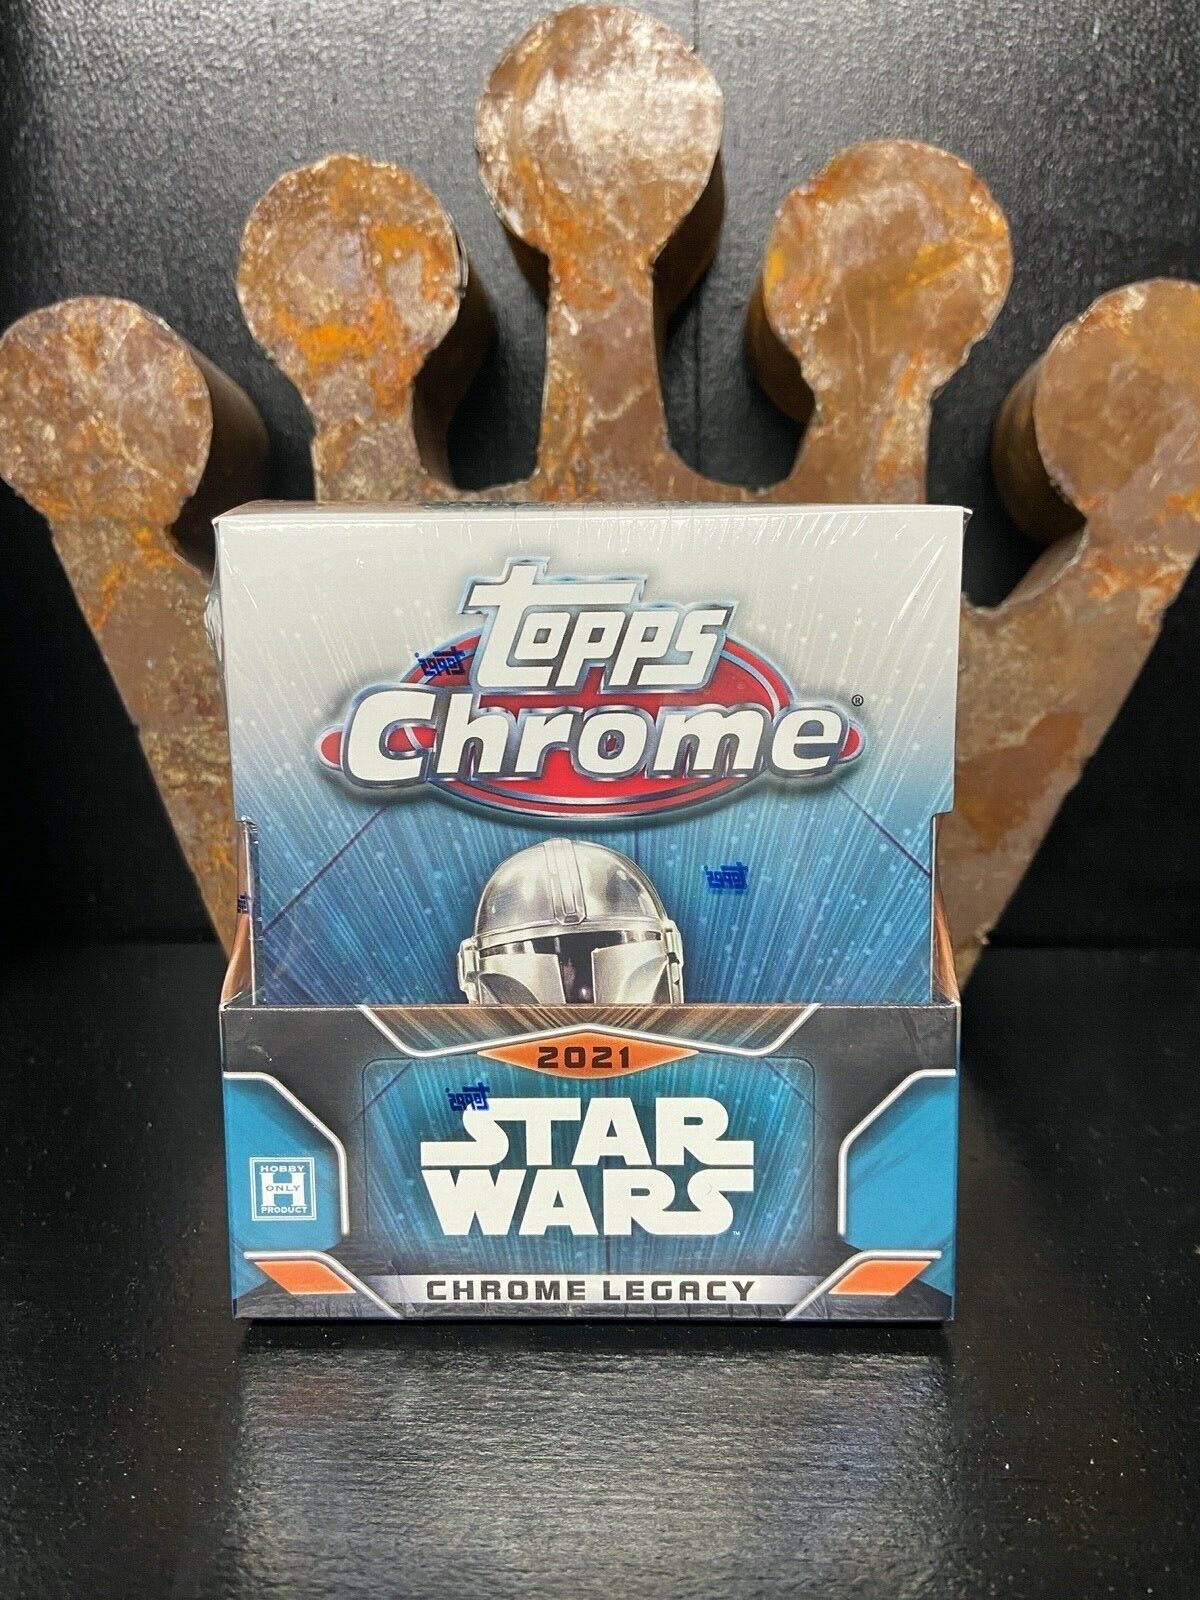 2021 Topps Chrome Star Wars Legacy Factory Sealed Hobby Box - 1 Auto or Sketch